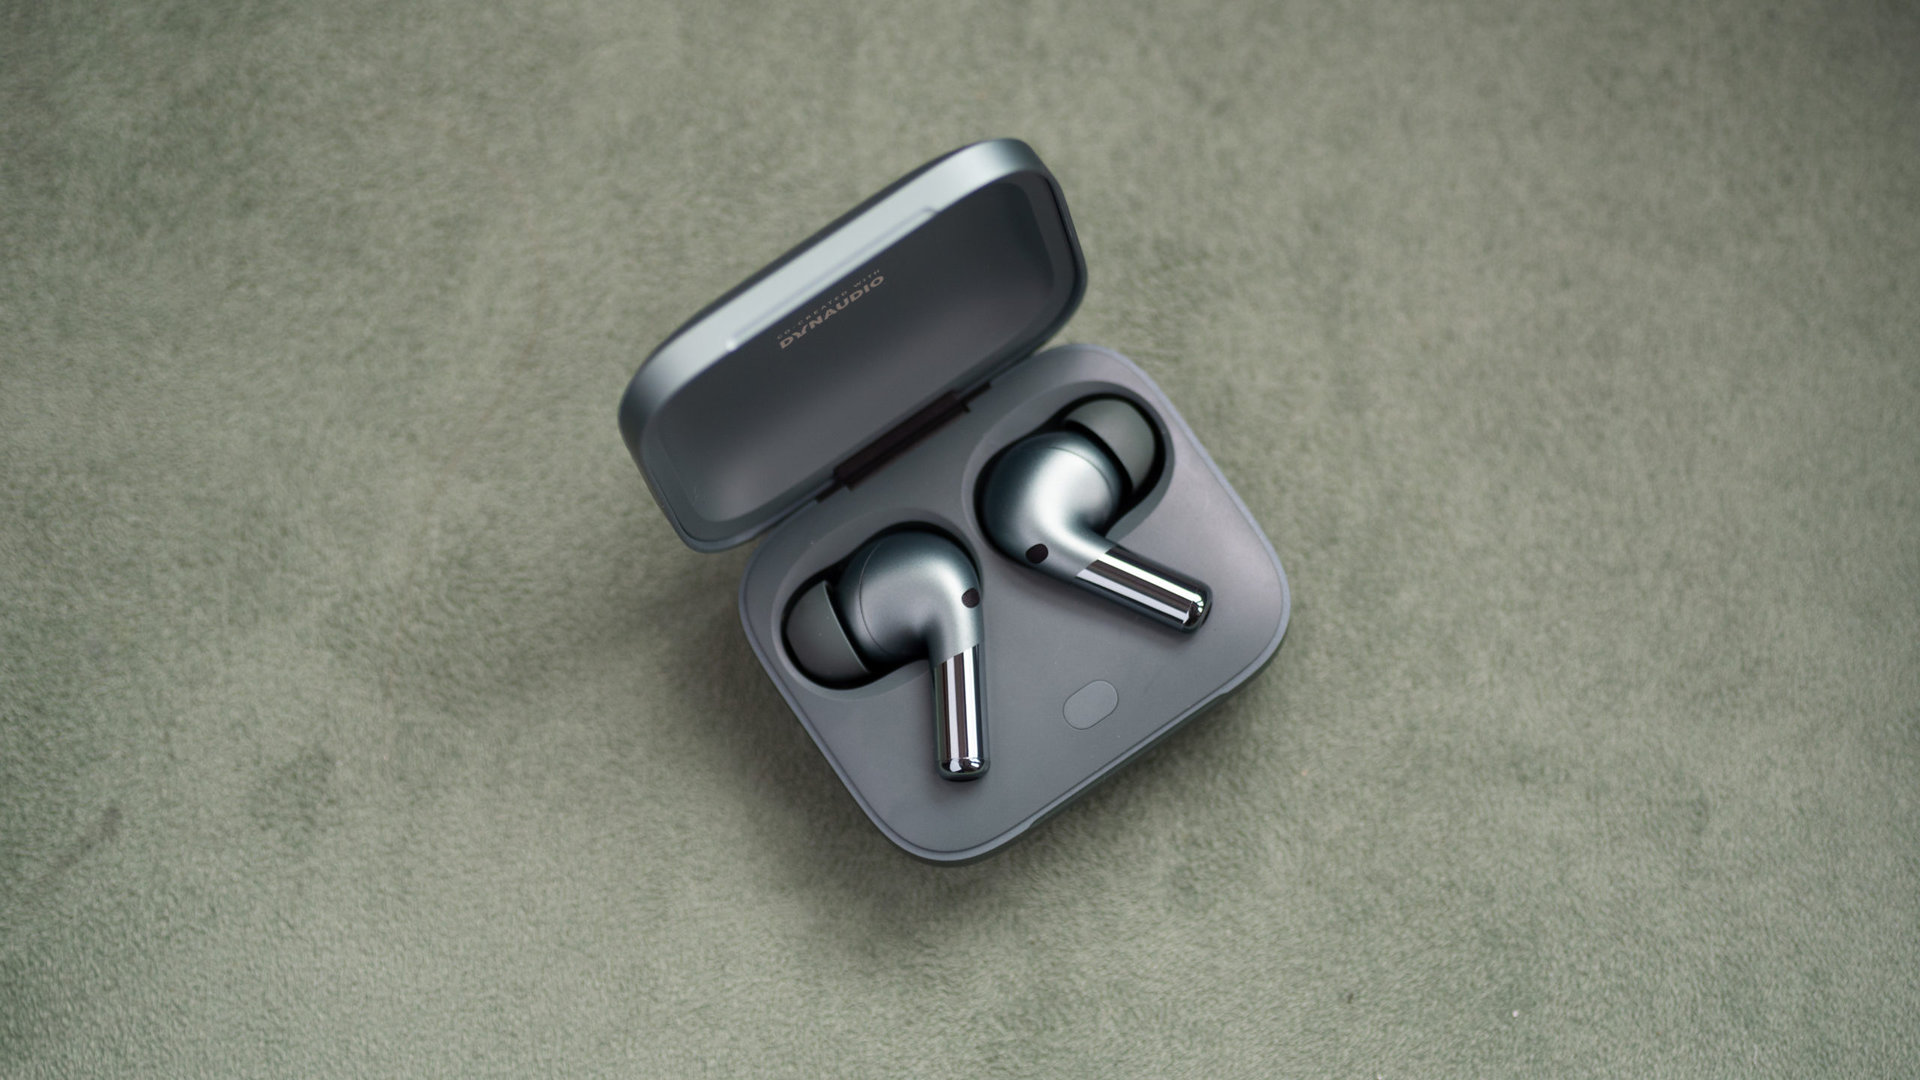 The OnePlus Buds Pro 2 noise cancelling wireless earbuds sit inside the open case.